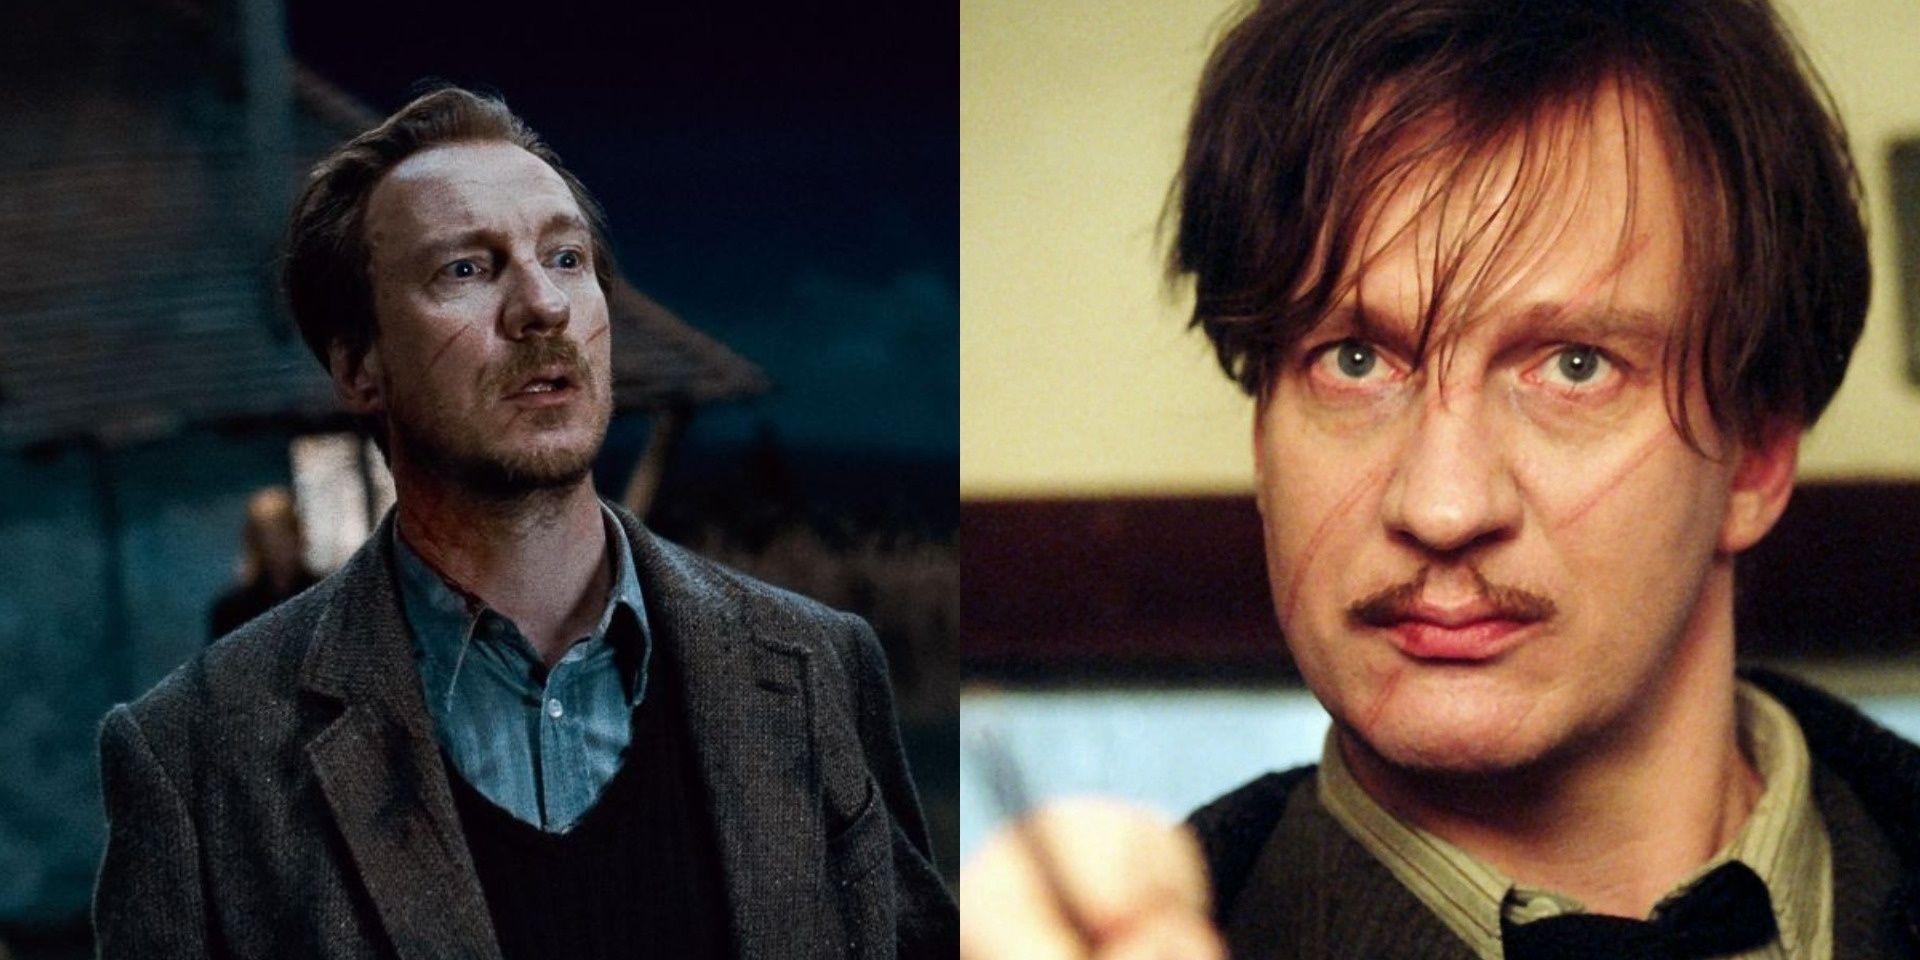 Two side by side images of Remus Lupin from Harry Potter.